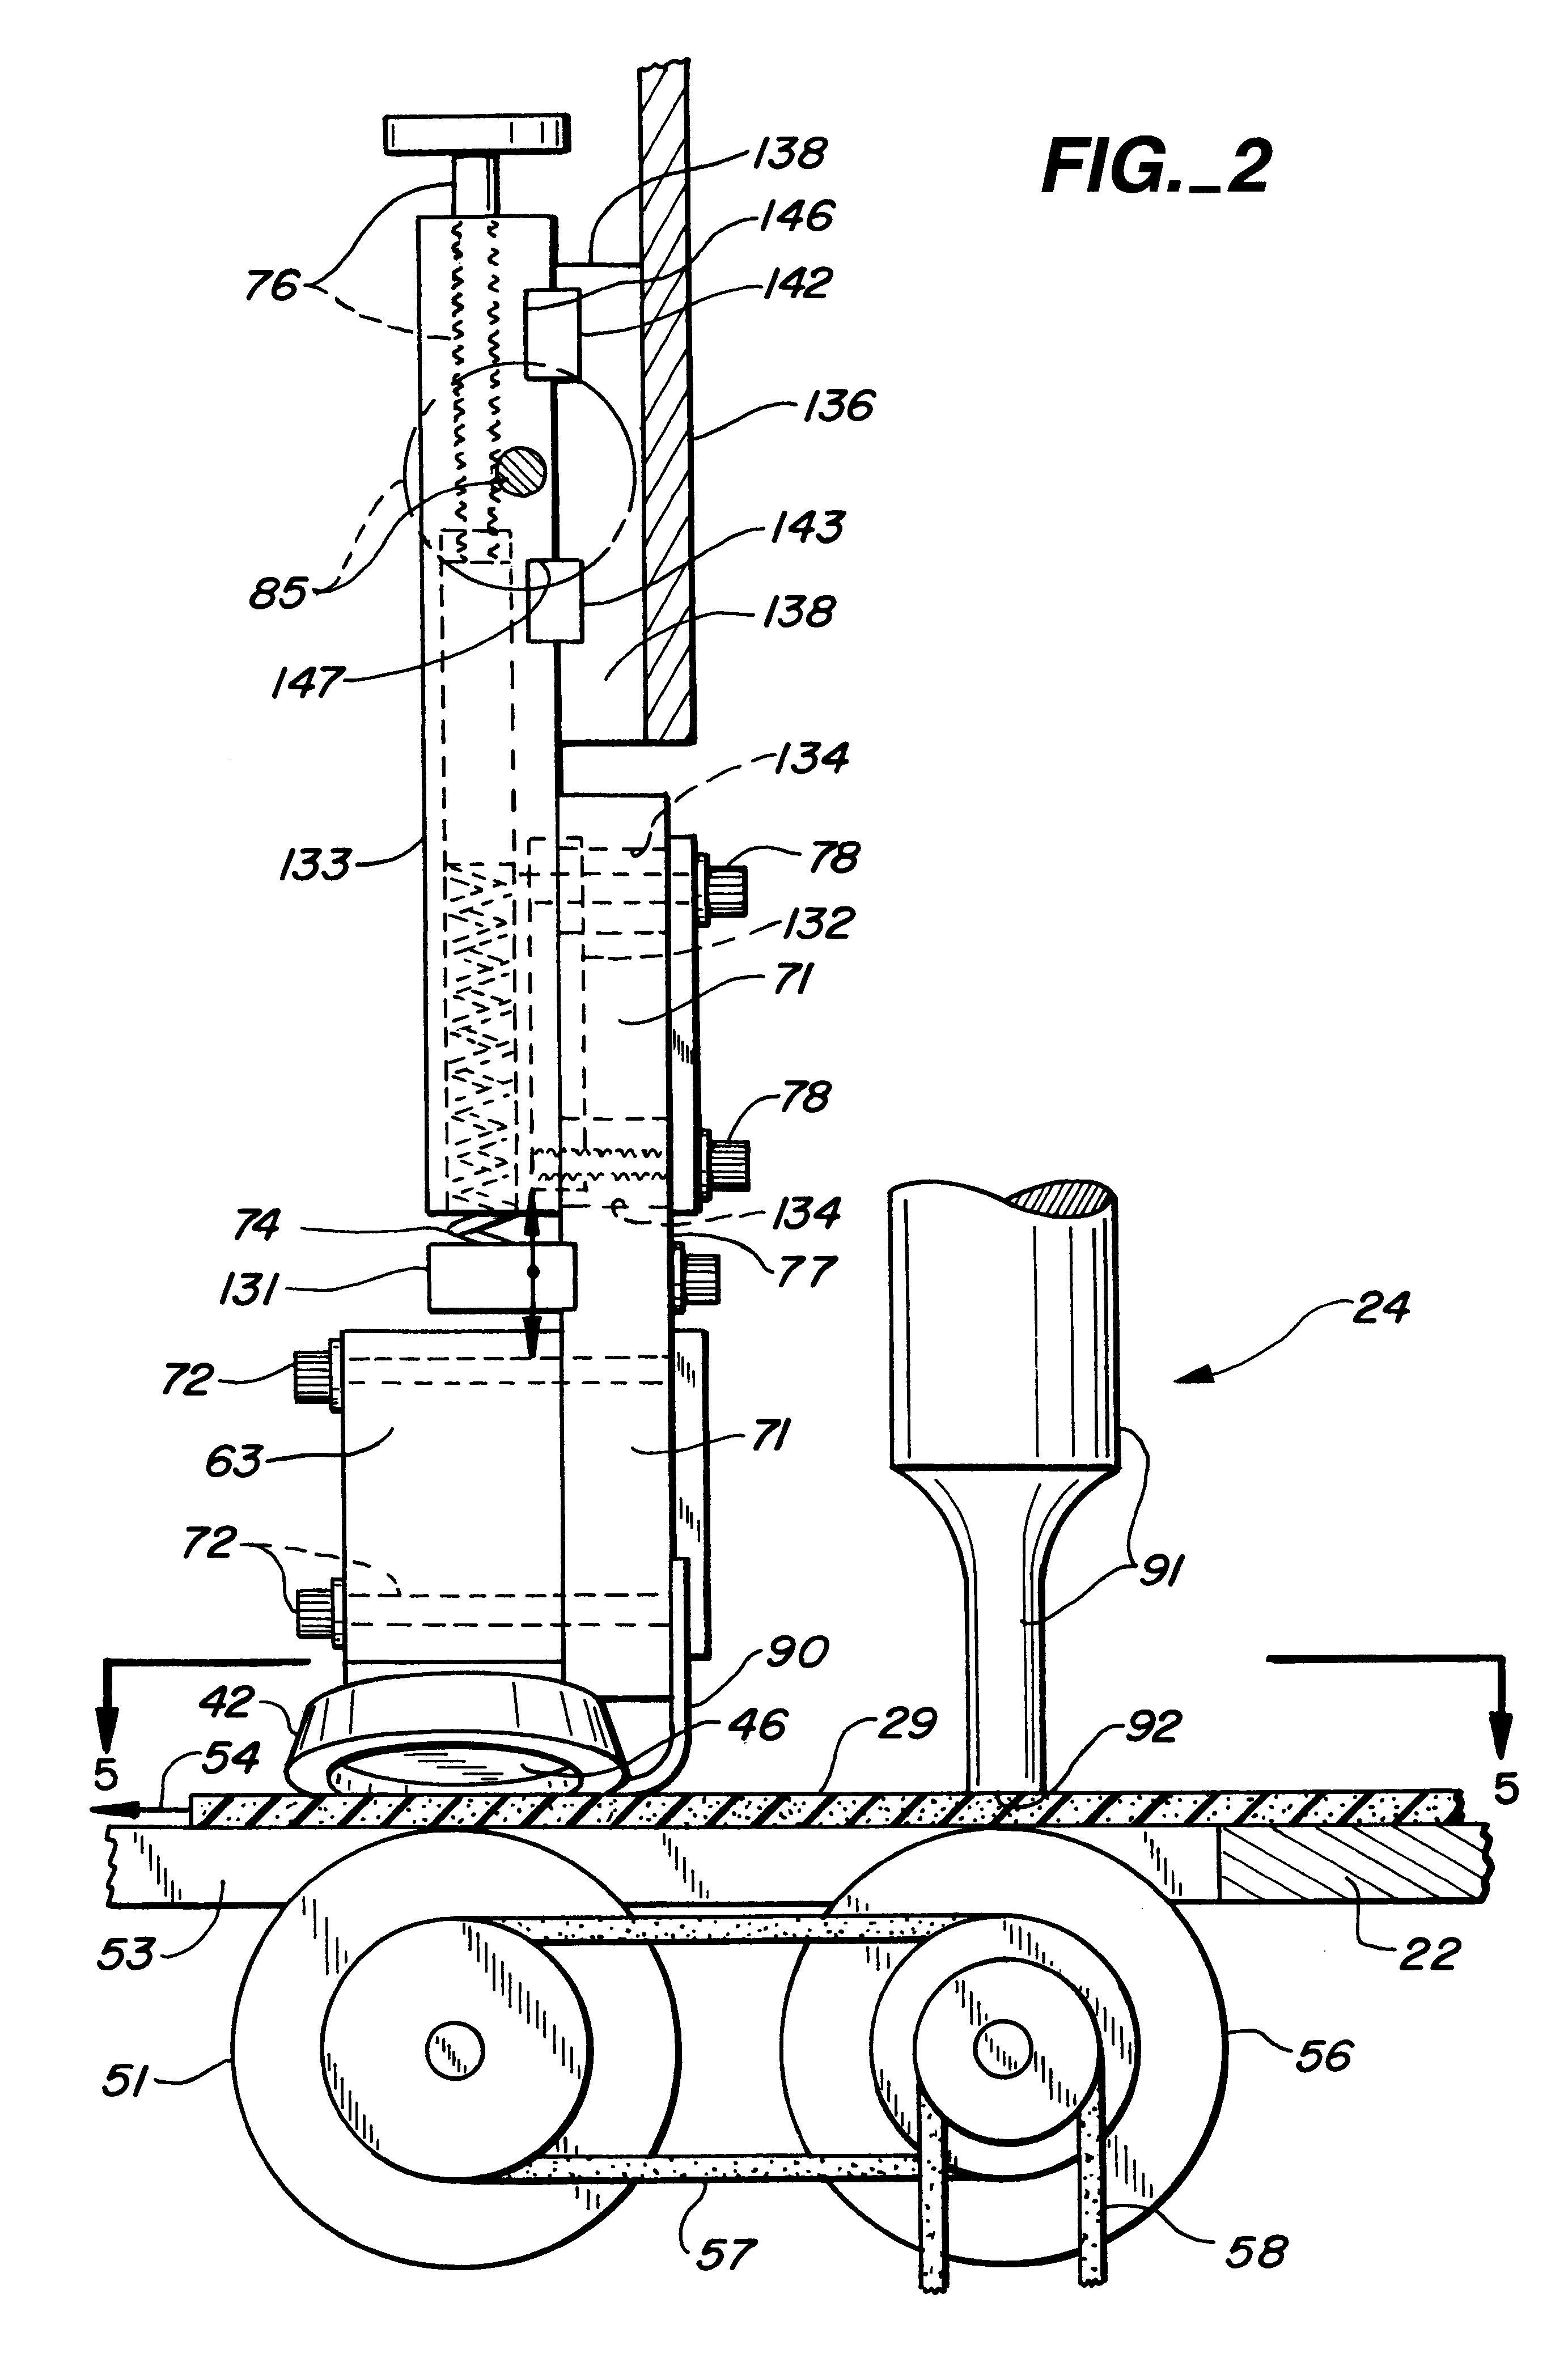 Apparatus and method for forming an adhesively bonded seam between resiliently compressible fabric sheets